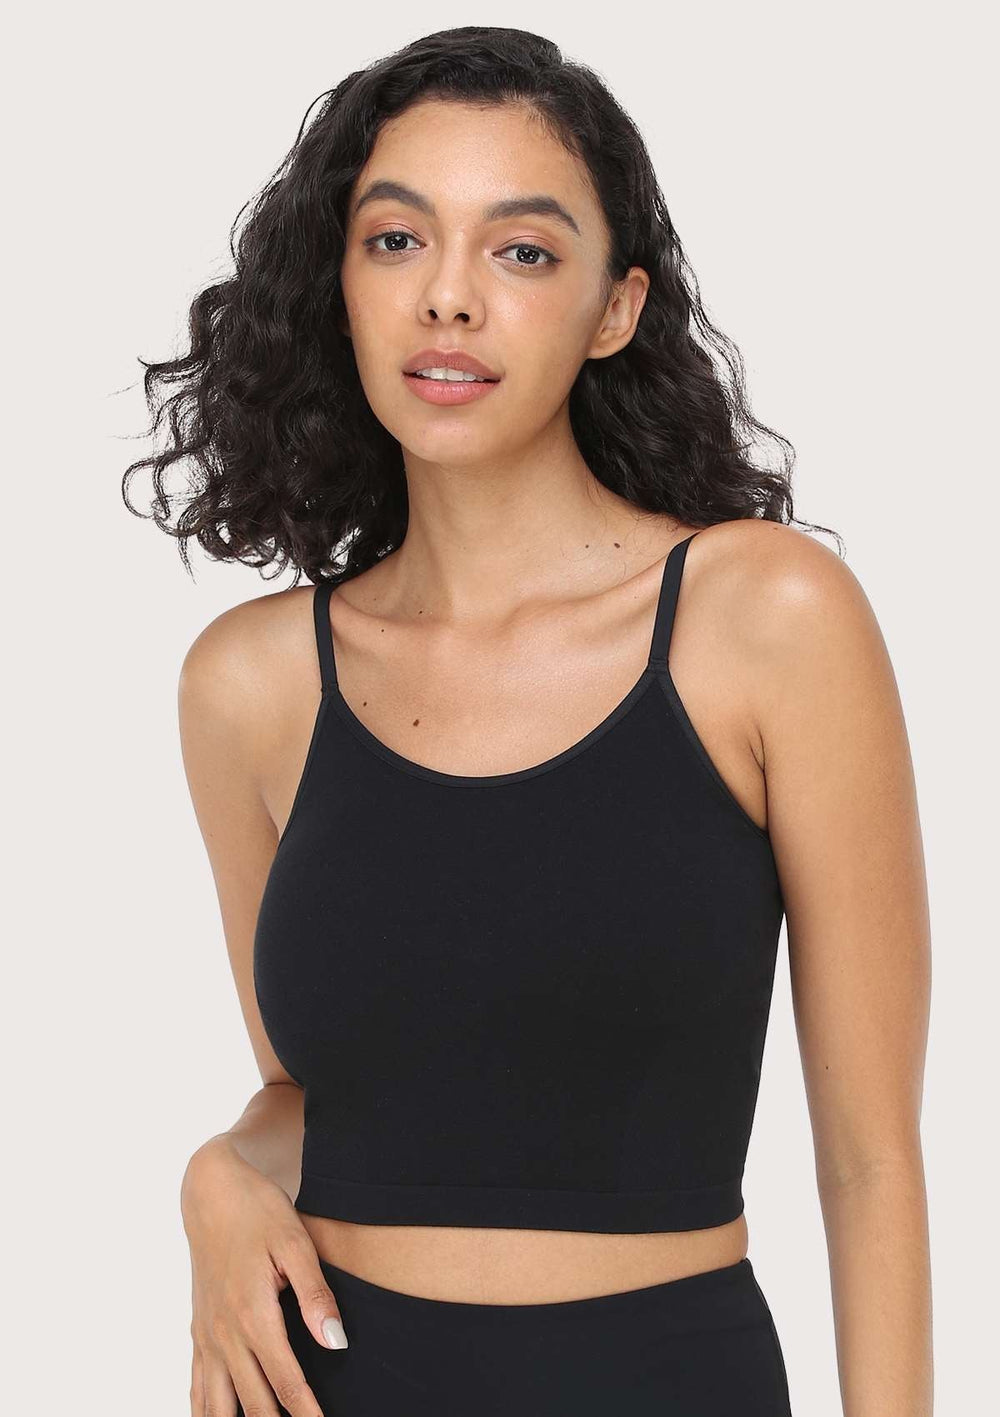 SONGFUL Love Cloud Yoga Tank Top with Built-In Bra for Petite